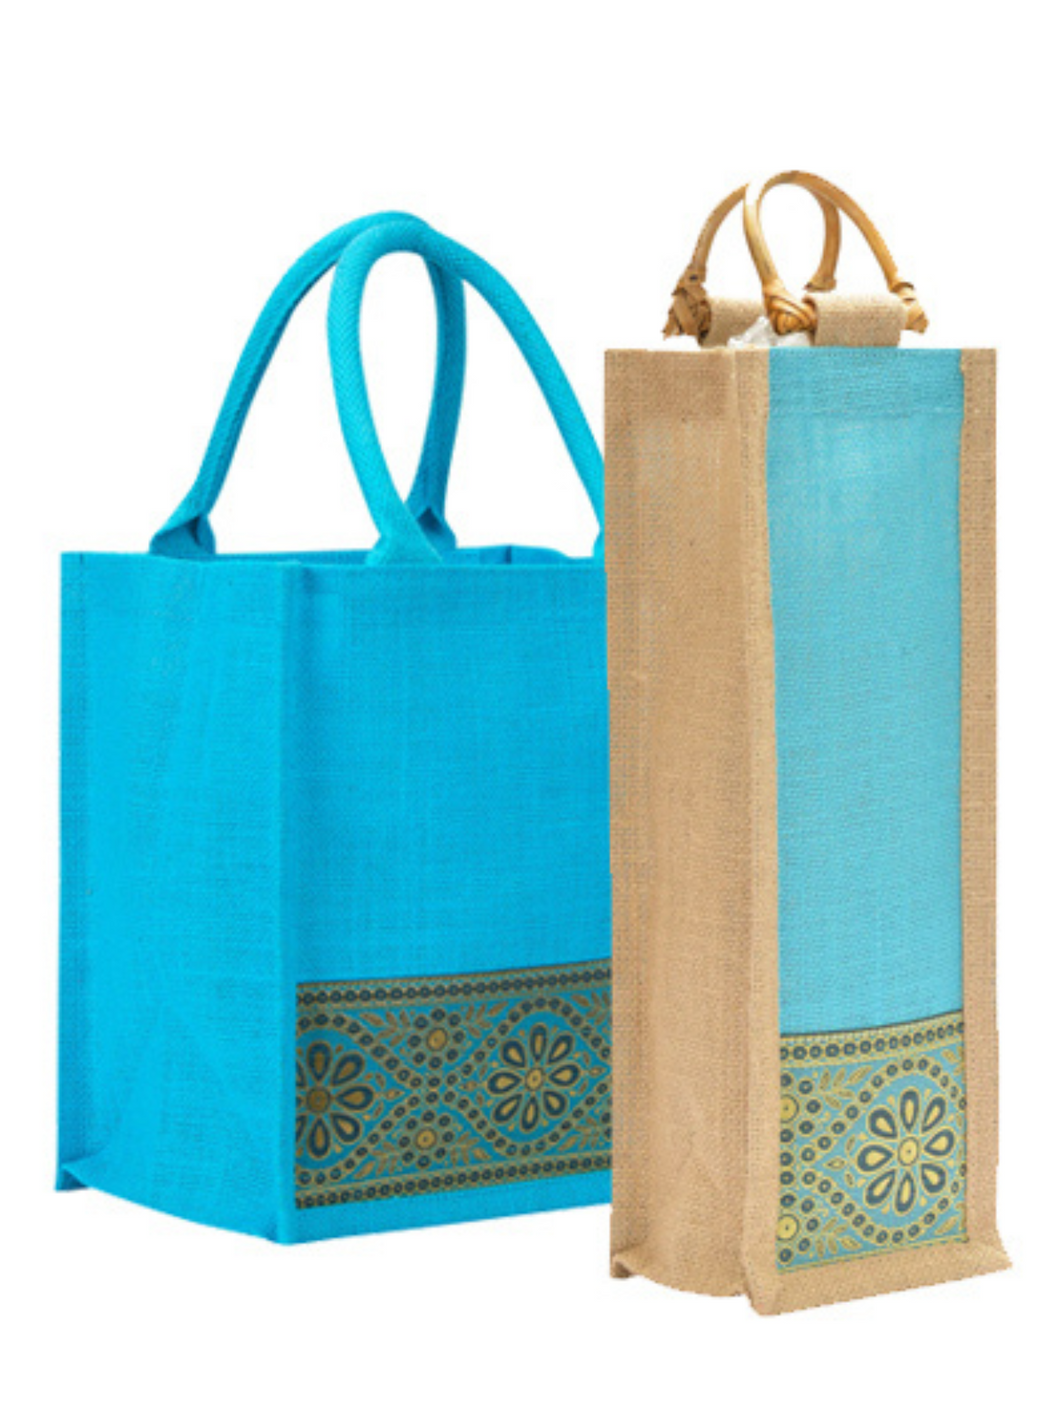 Combo of 11X10 LACE ZIPPER LUNCH (B-254-PEACOCK BLUE) and BOTTLE BAG WITH LACE / PRINT (B-010-TURQUOISE BLUE)